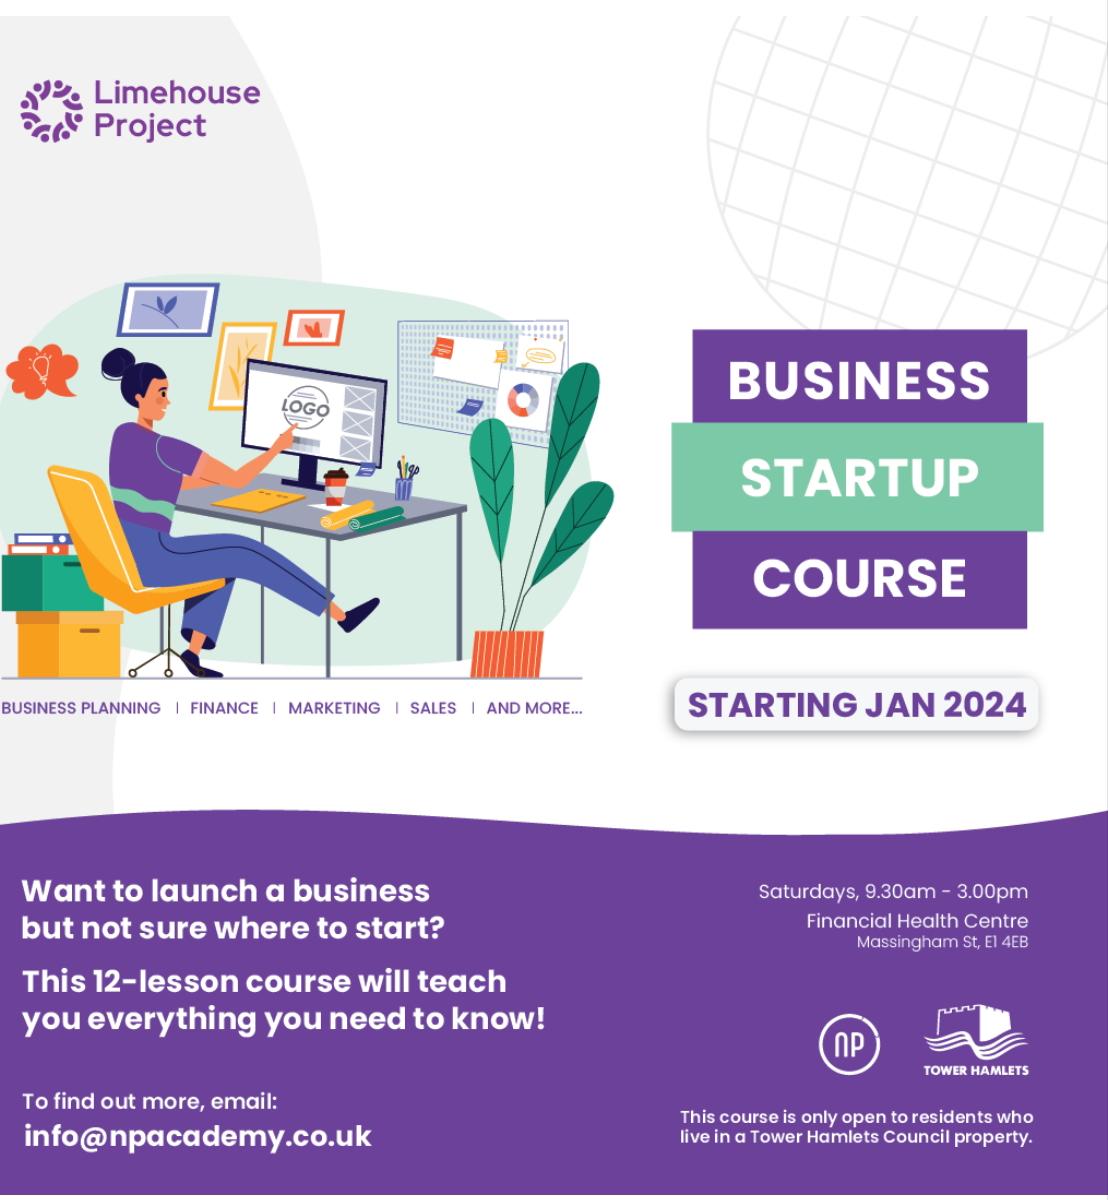 Dear Residents Join our 12-Lesson Business Startup Course and turn your business idea into reality! What you'll get: Expert guidance Practical knowledge Networking opportunities Only 15 places available. To express your interest using this link: forms.office.com/e/hypn6rsb85